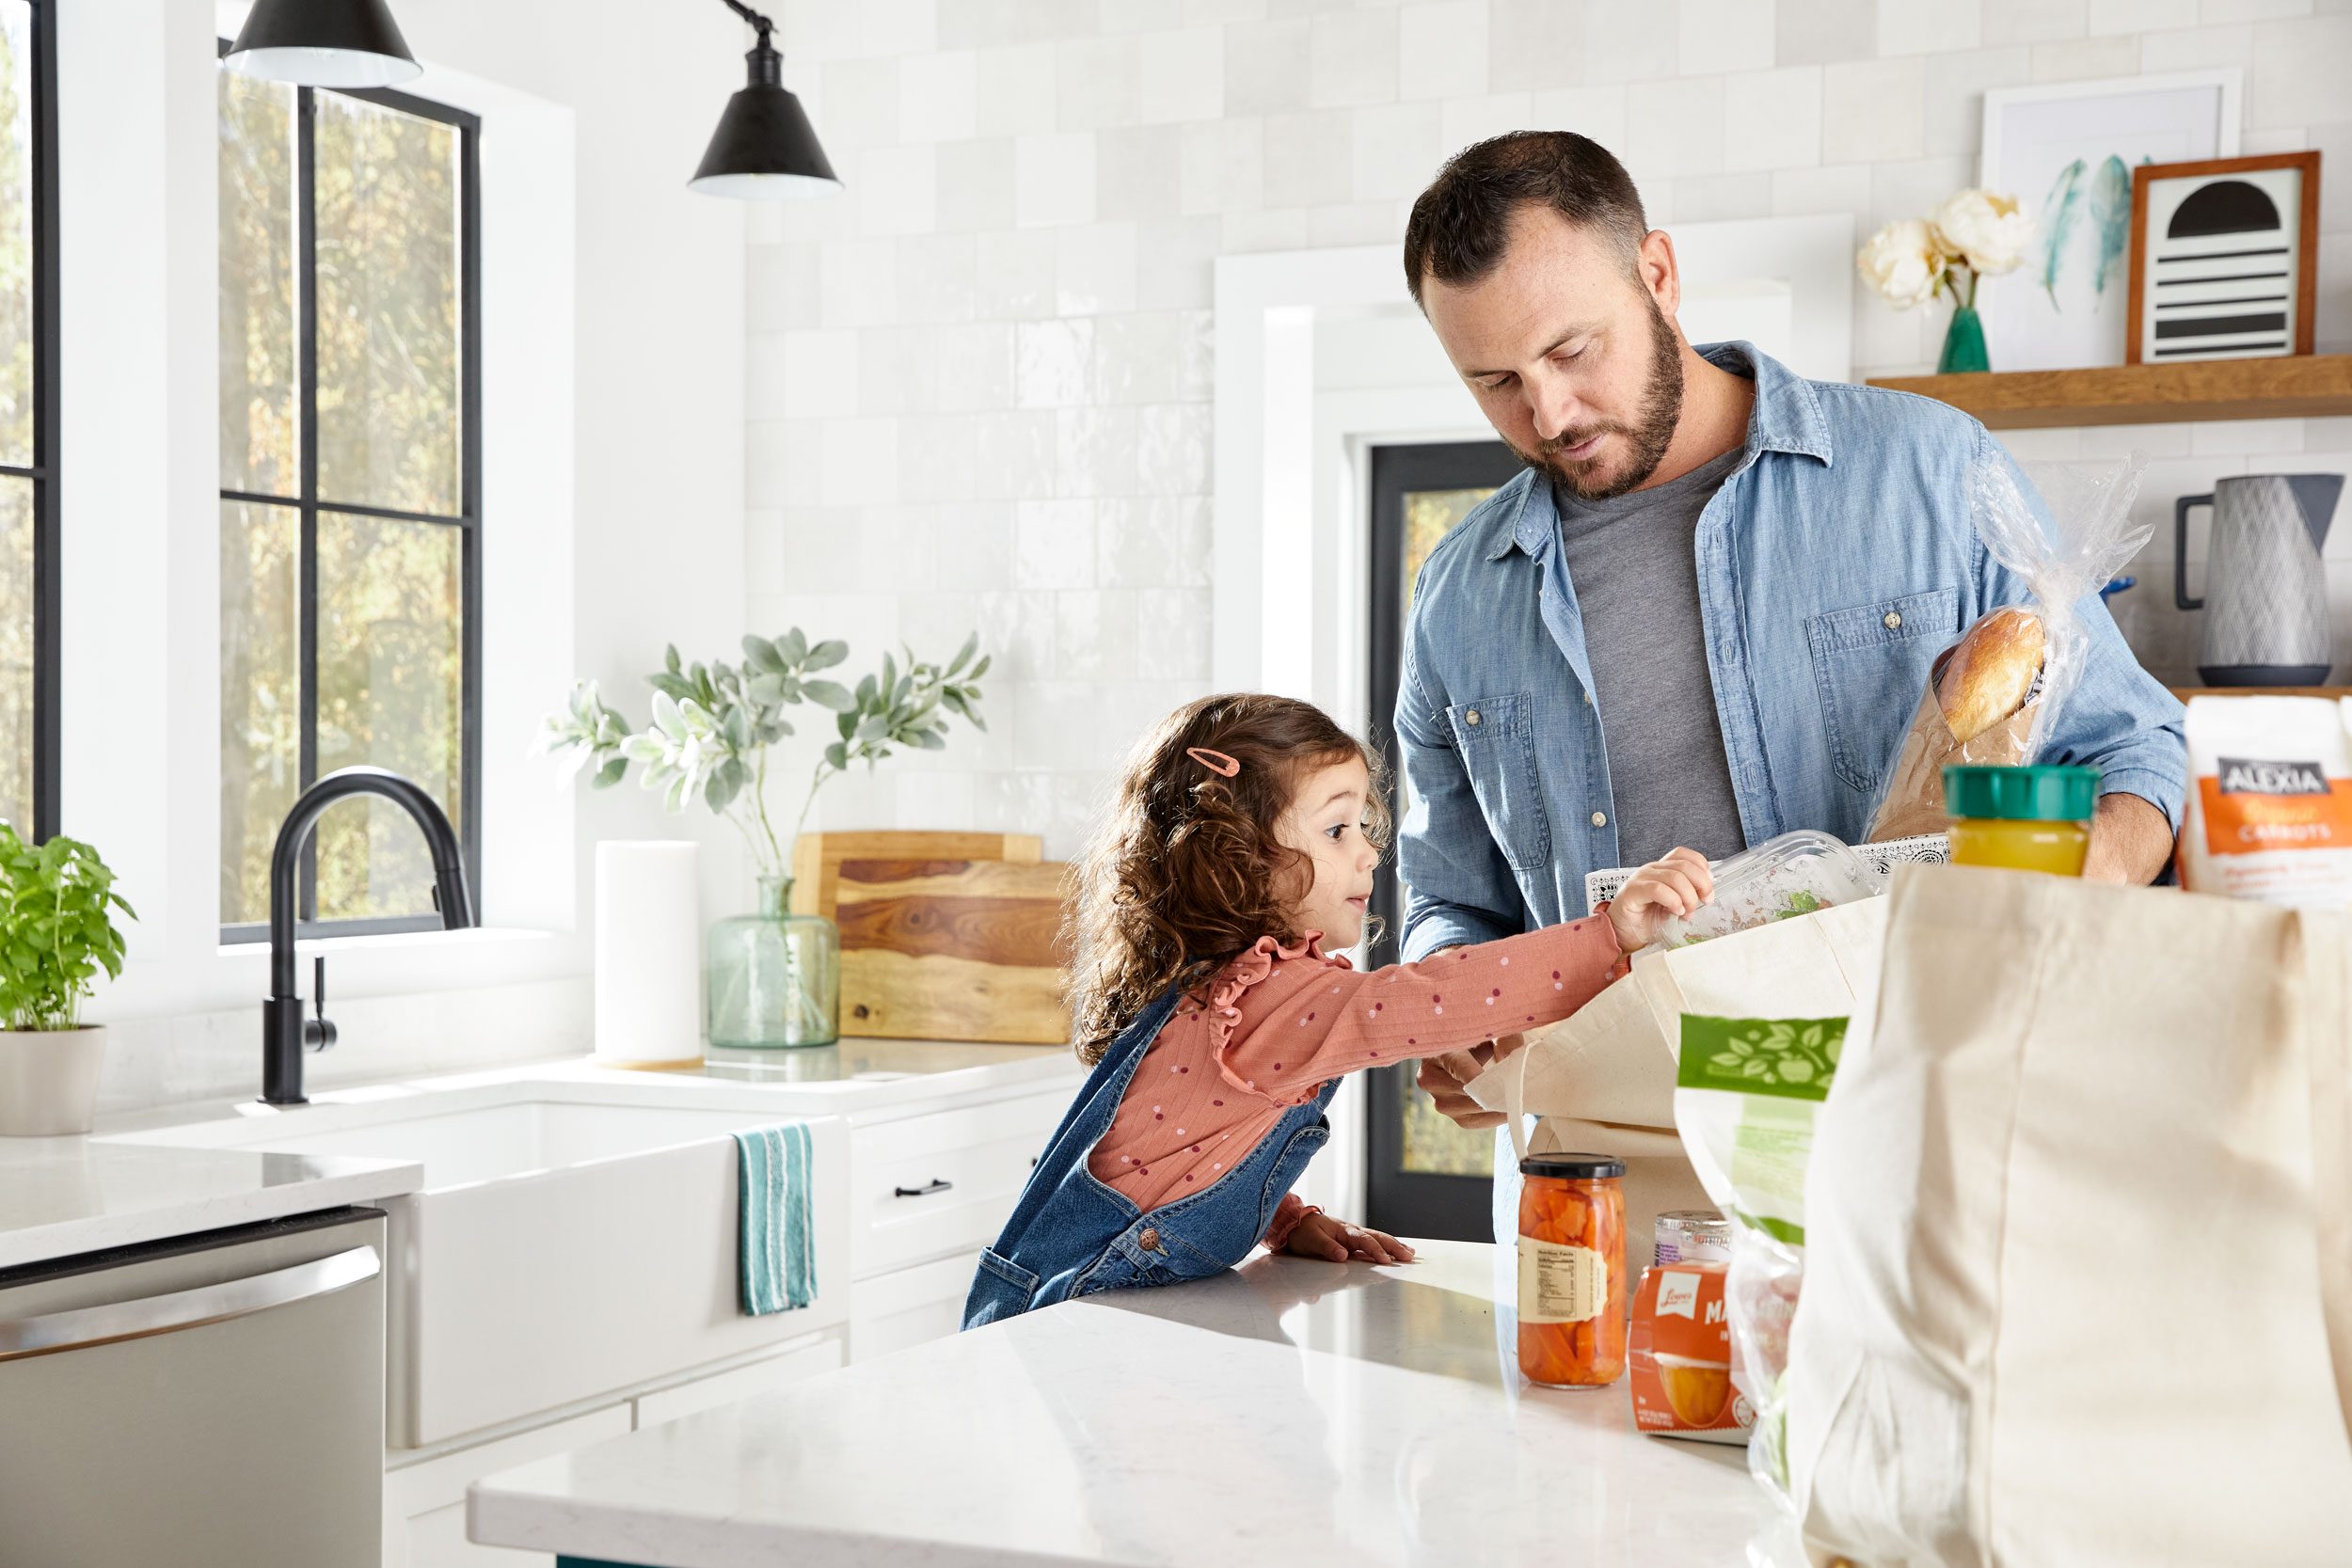 father-unpacking-groceries-with-daughter-dc-advertising-photographer-eli-meir-kaplan